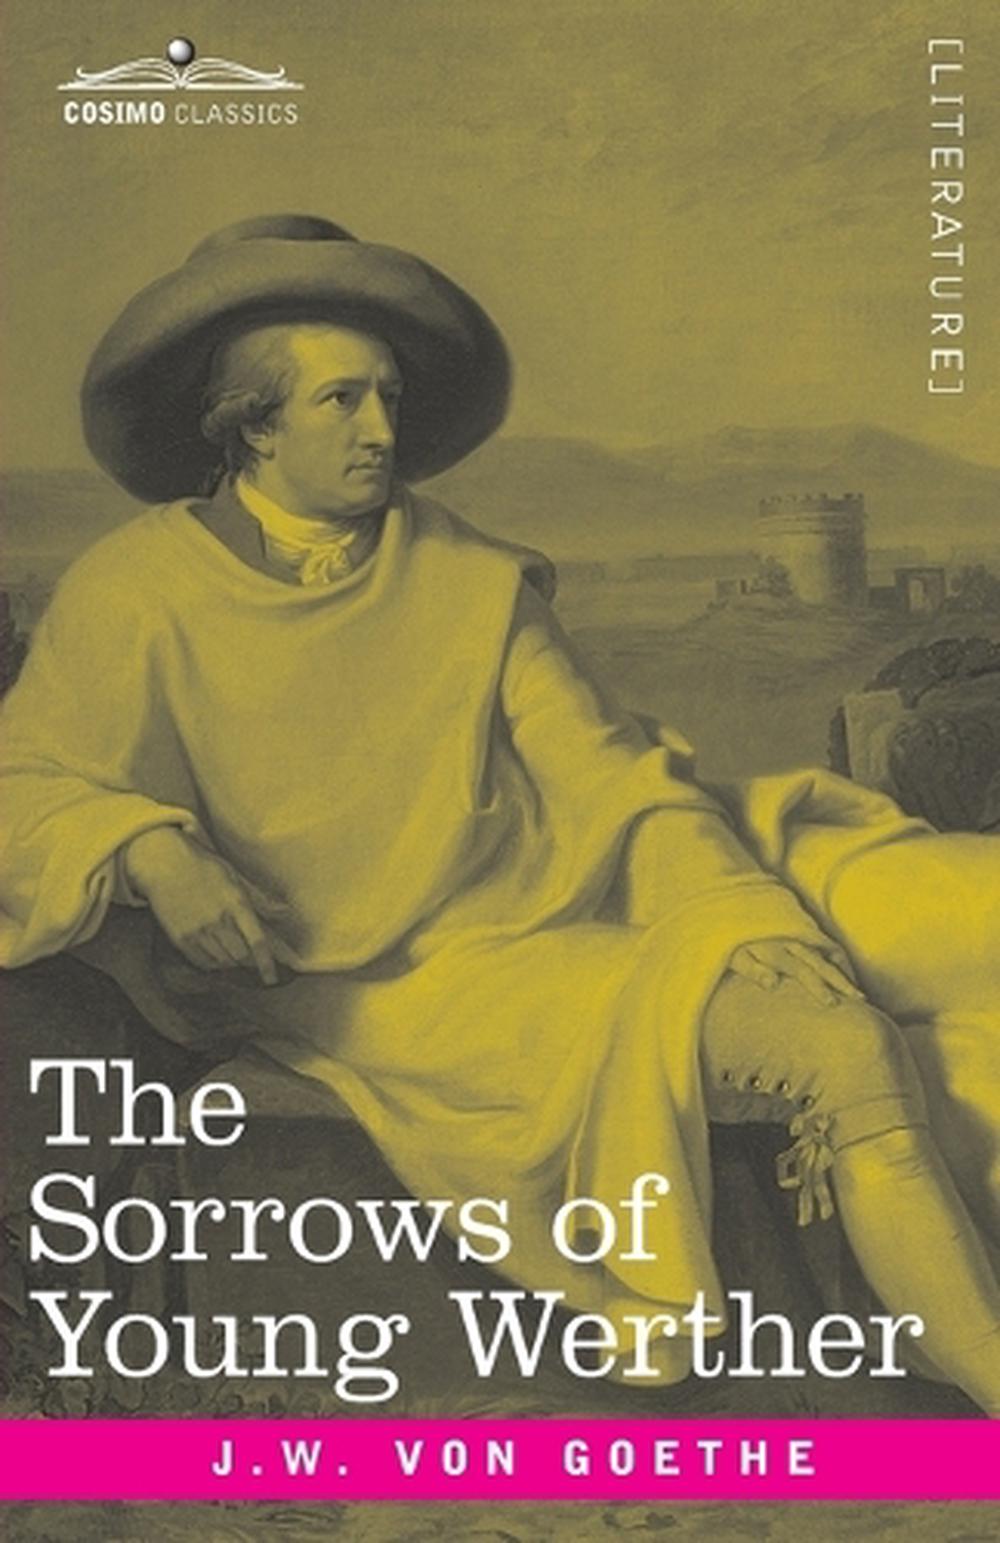 The Sorrows of Young Werther by Johann Wolfgang von Goethe